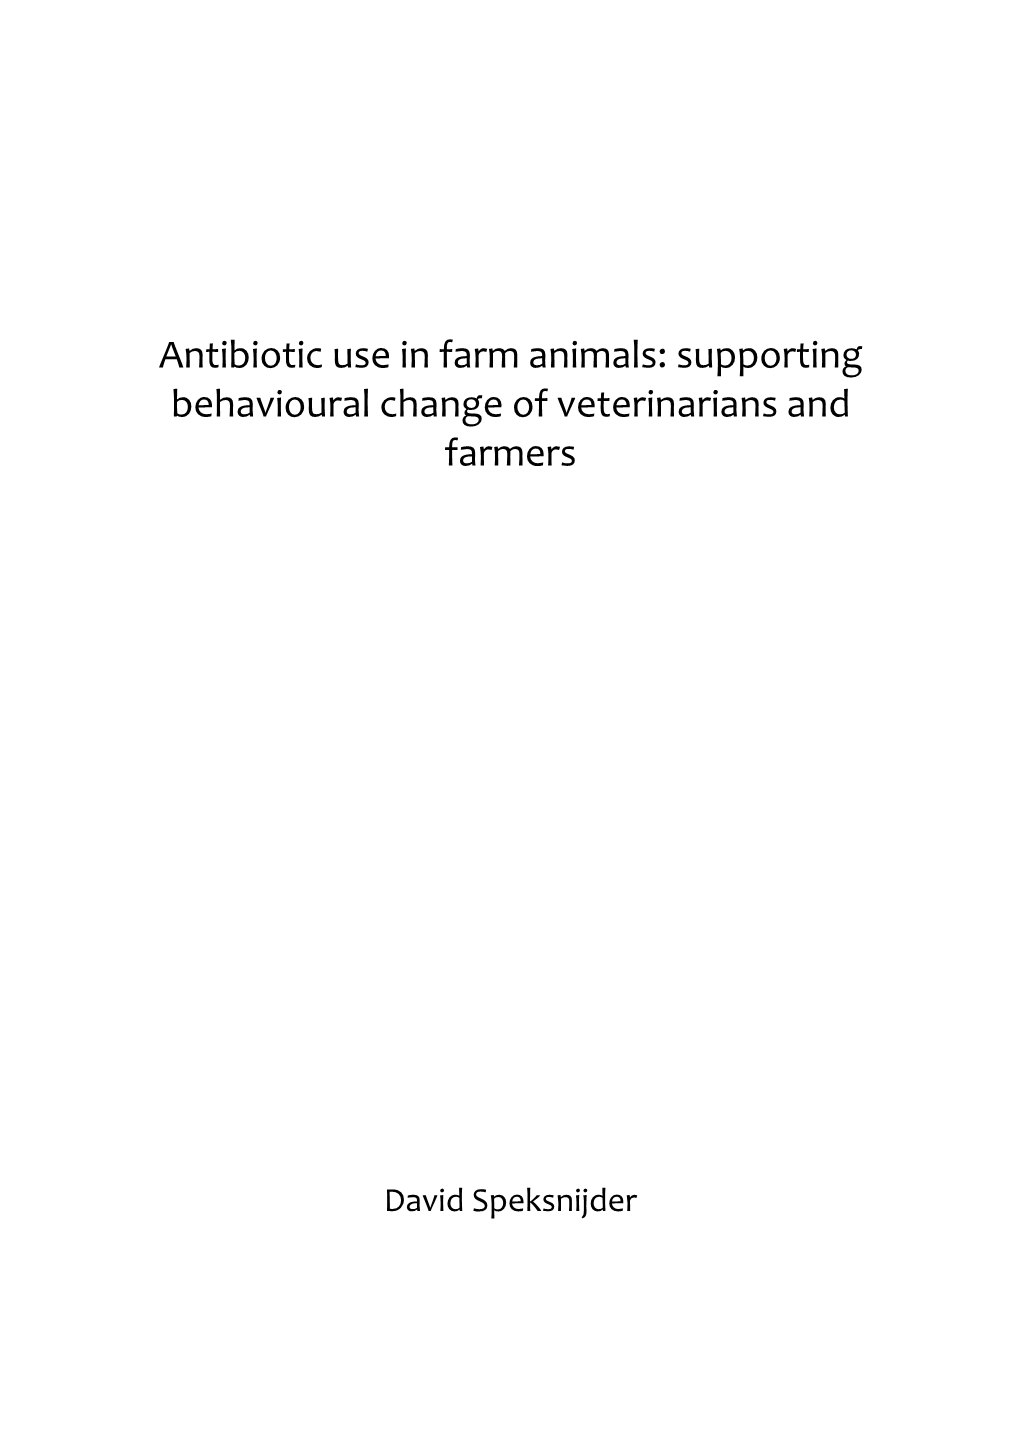 Antibiotic Use in Farm Animals: Supporting Behavioural Change of Veterinarians and Farmers